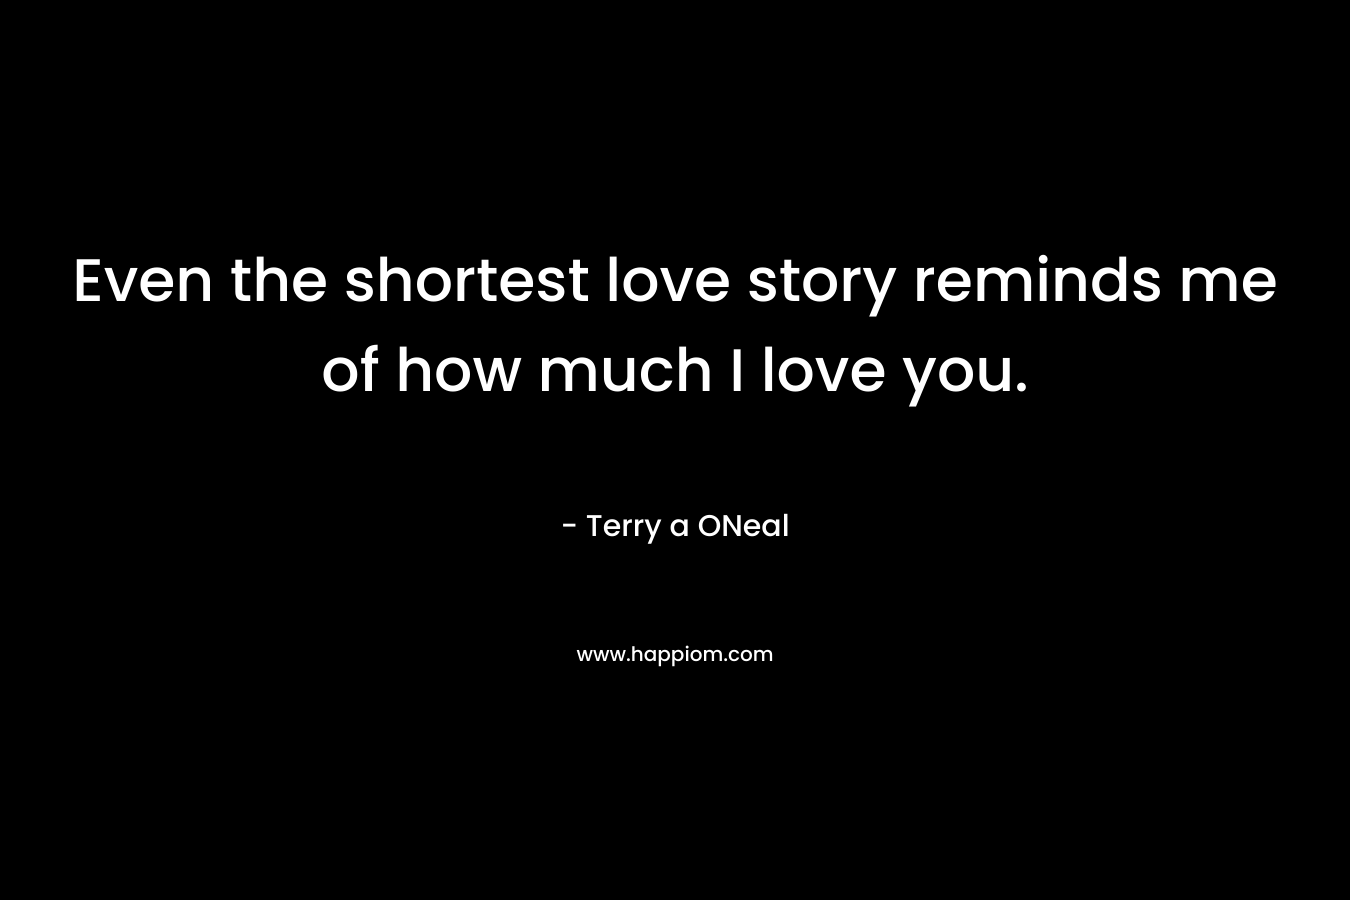 Even the shortest love story reminds me of how much I love you. – Terry a ONeal